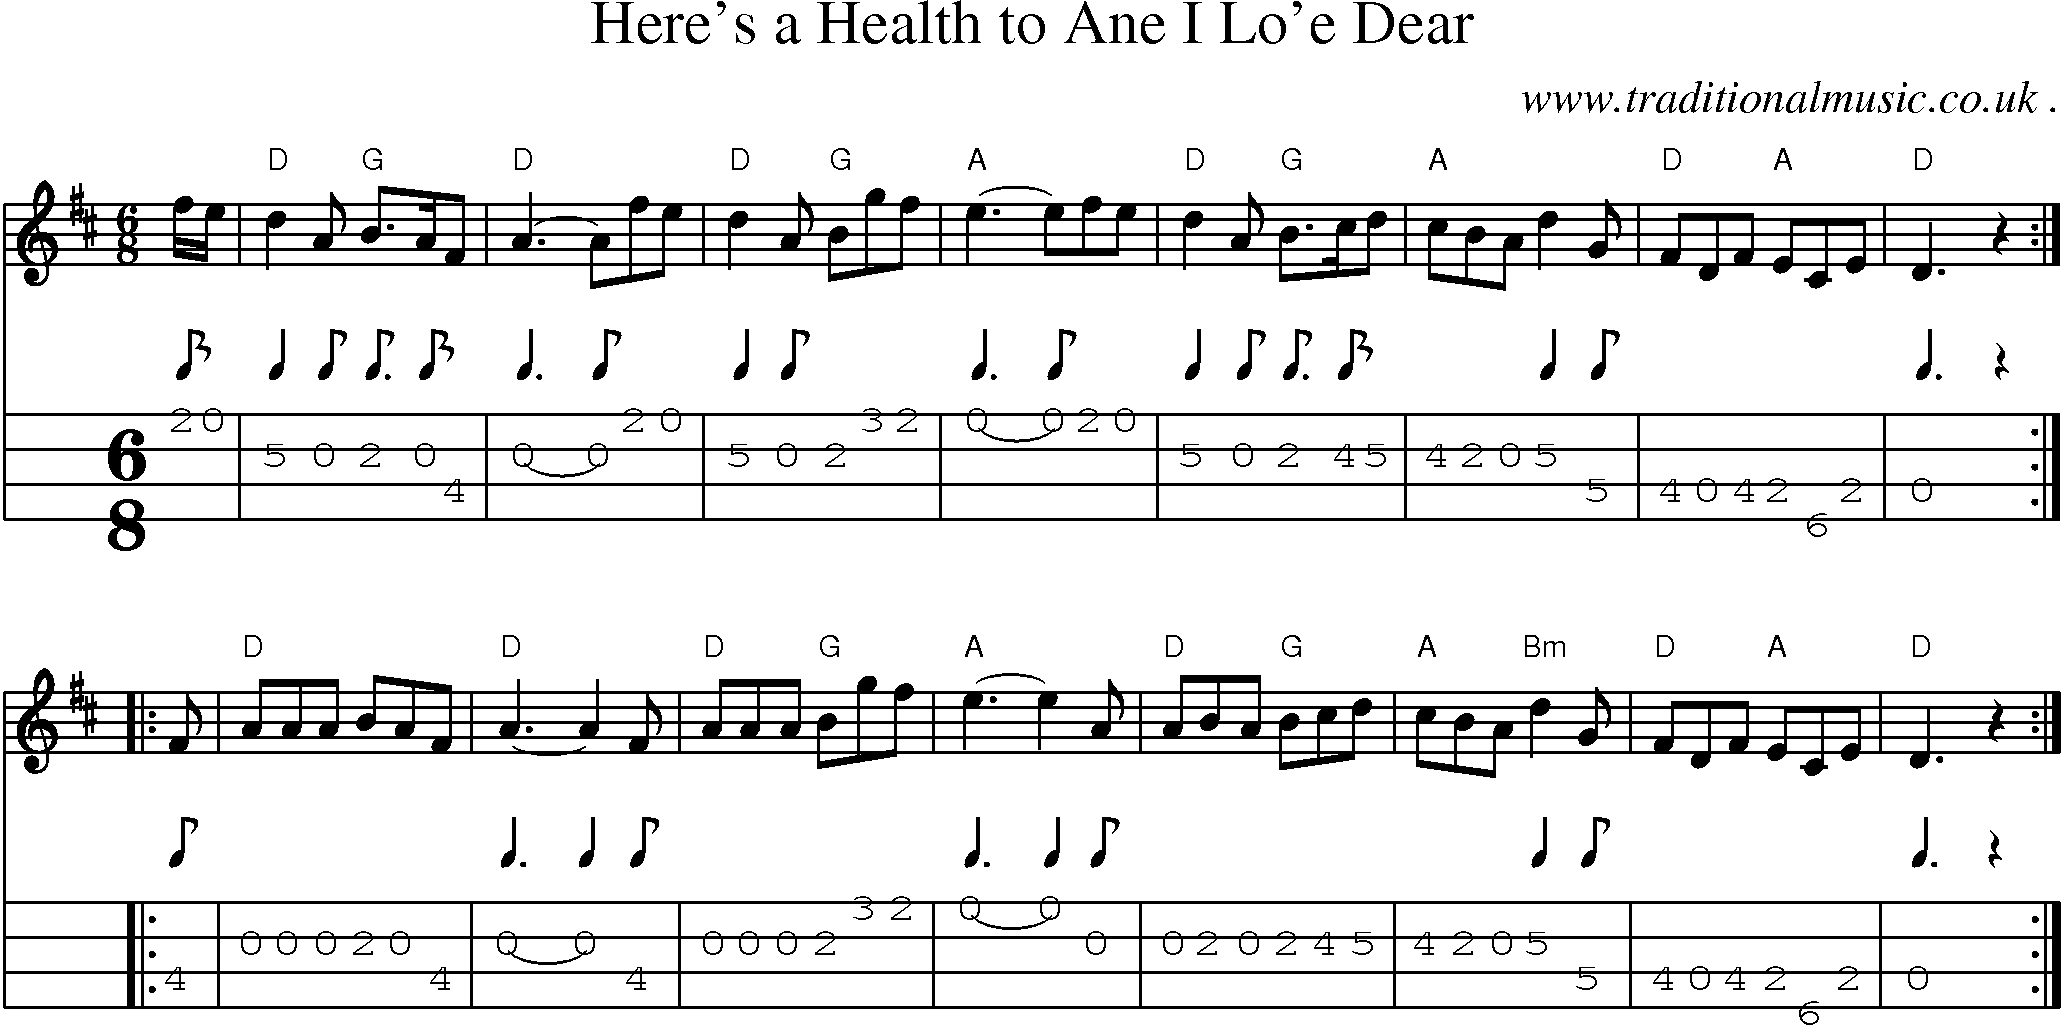 Sheet-music  score, Chords and Mandolin Tabs for Heres A Health To Ane I Loe Dear